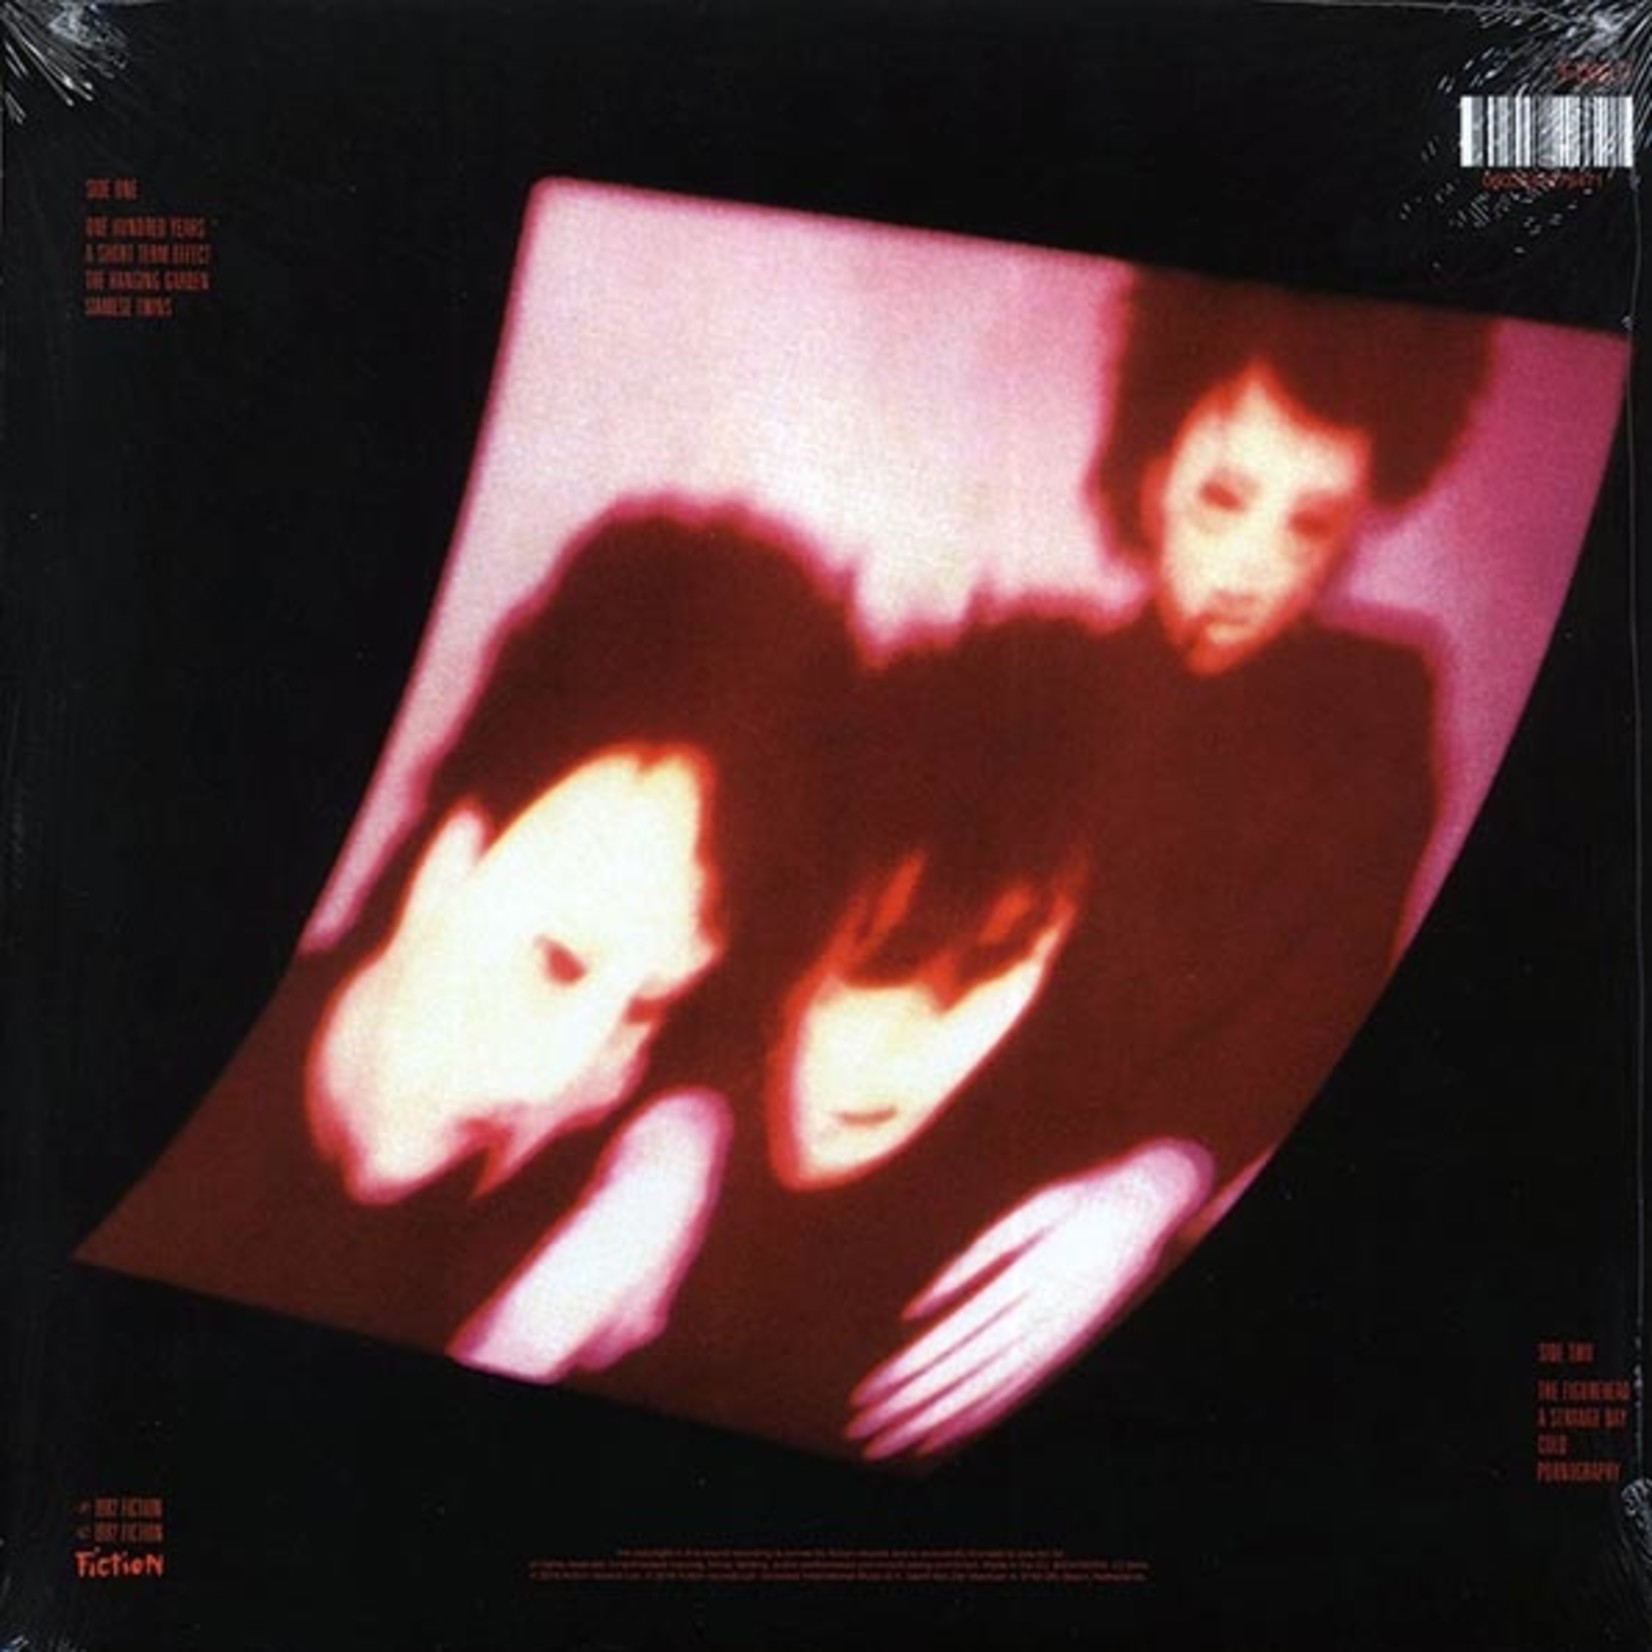 The Cure - Pornography (Fiction) (incl. mp3) (180g) (Remastered)